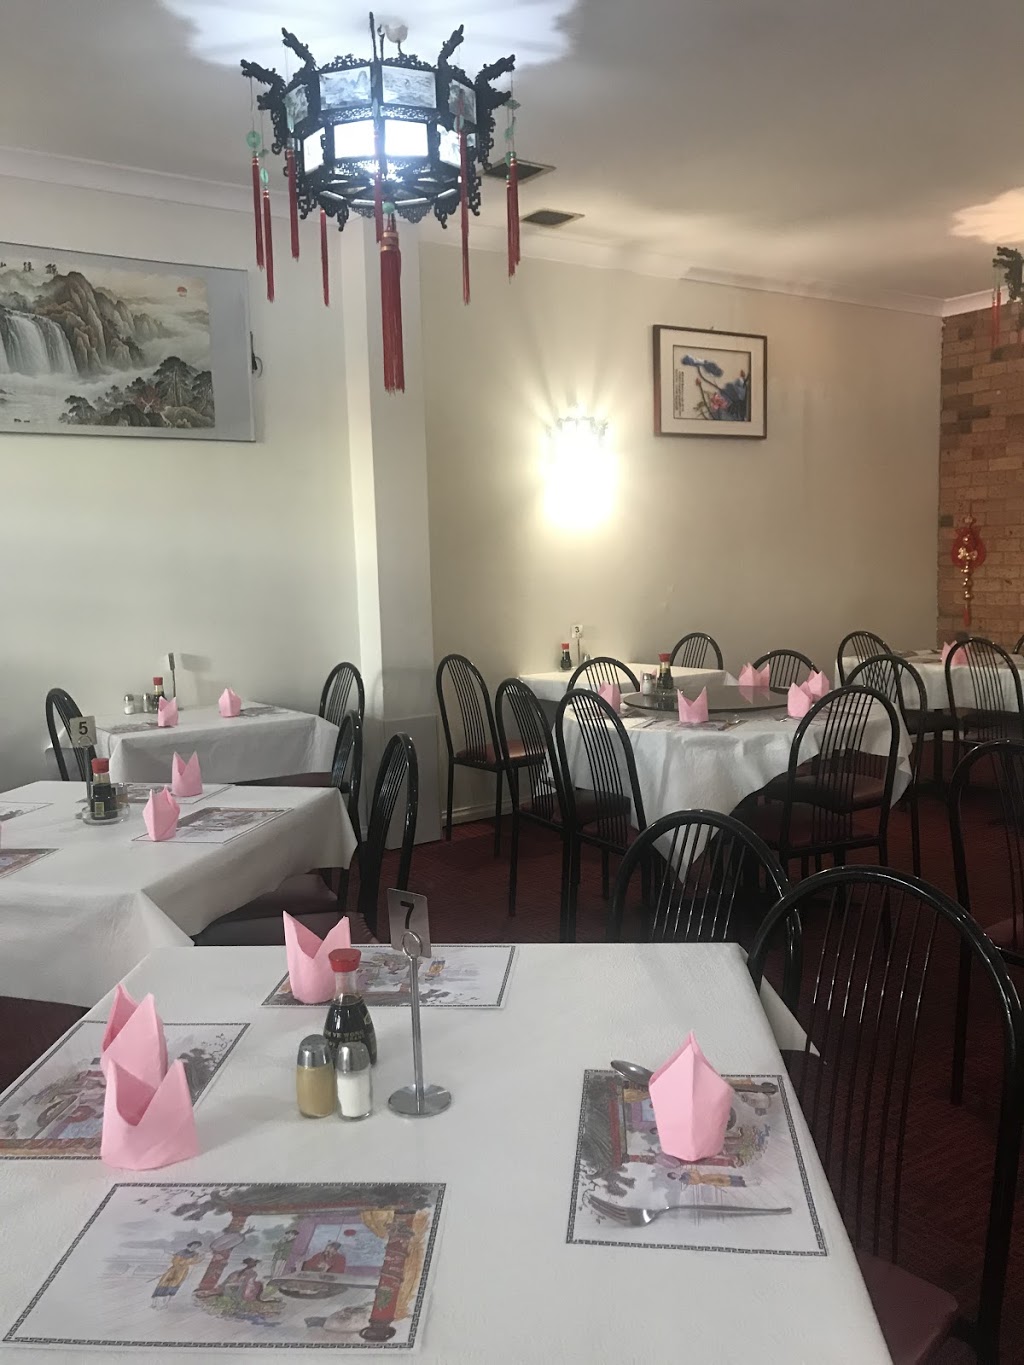 Eastern Palace Chinese Restaurant | restaurant | 12 Hill End Rd, Doonside NSW 2767, Australia | 0296716534 OR +61 2 9671 6534